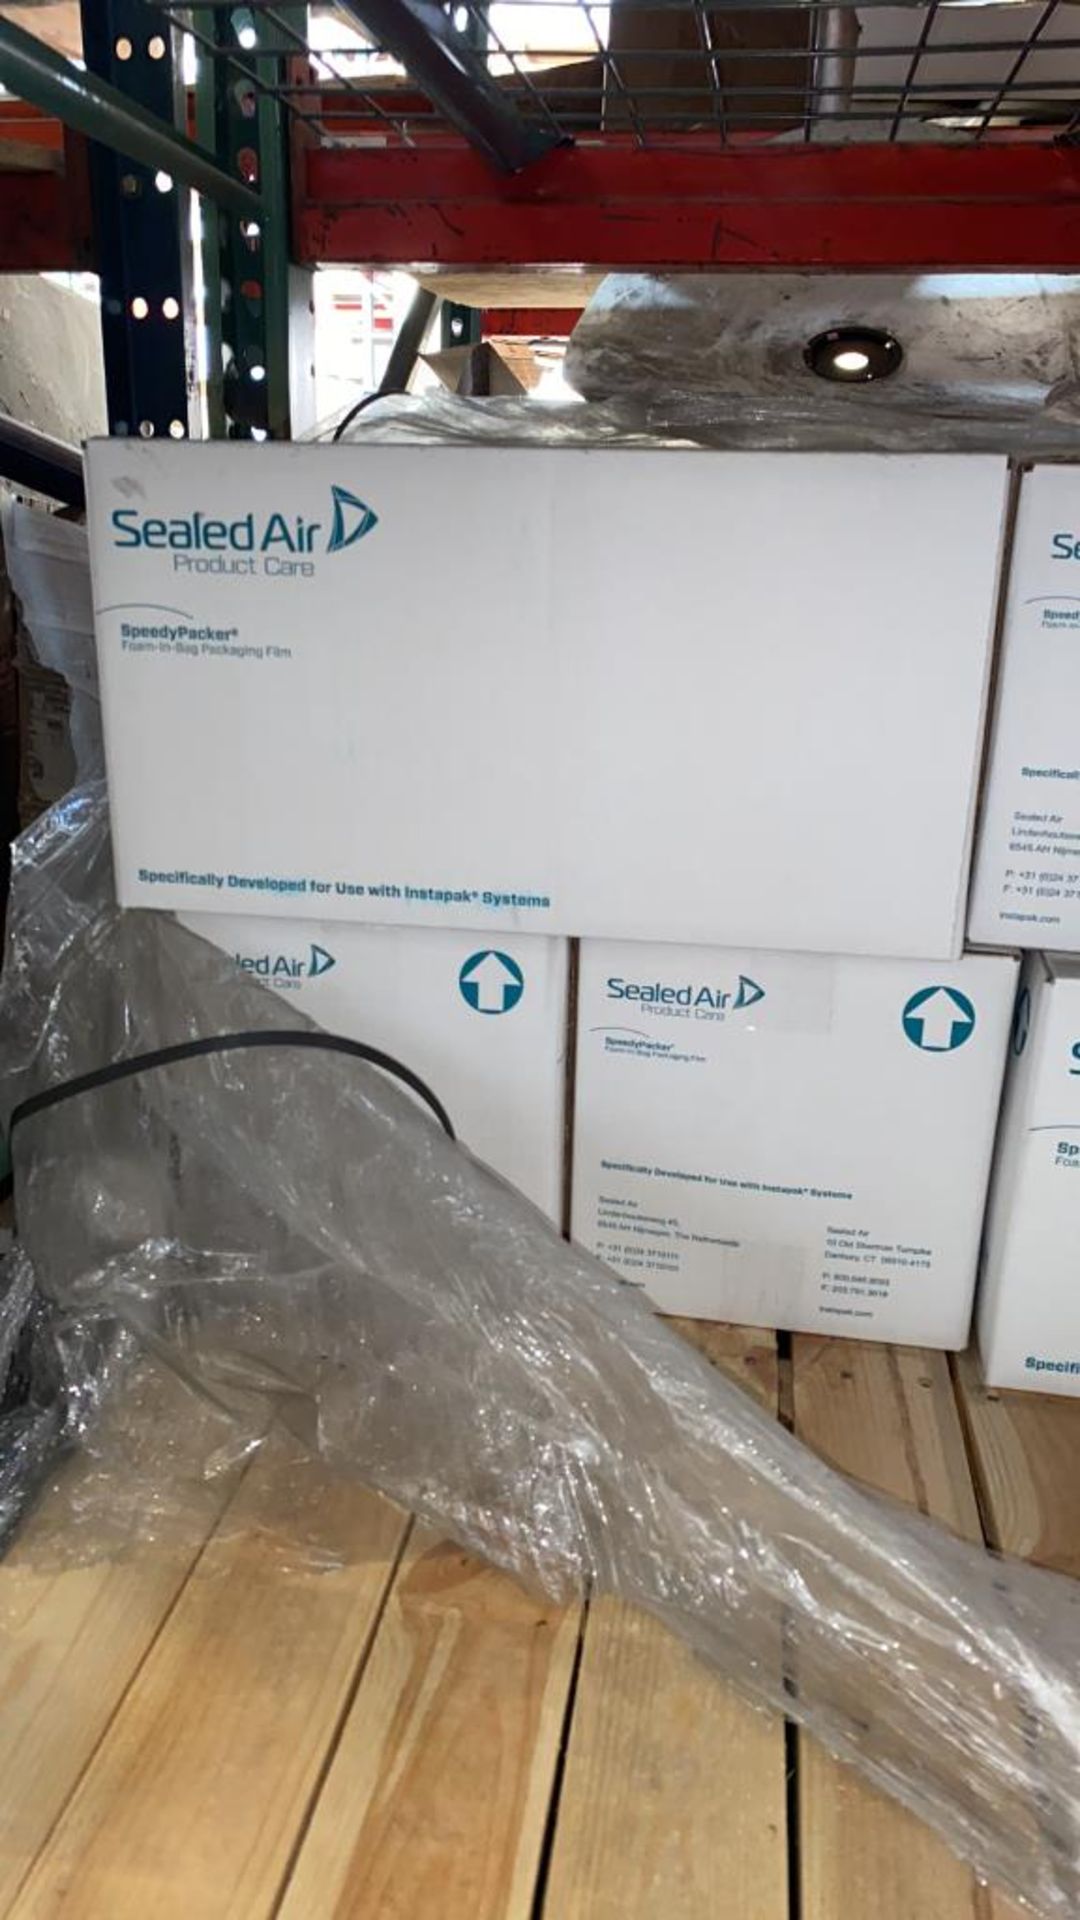 Brand NEW In-Box Sealed Air Speedy Packer - Image 2 of 3